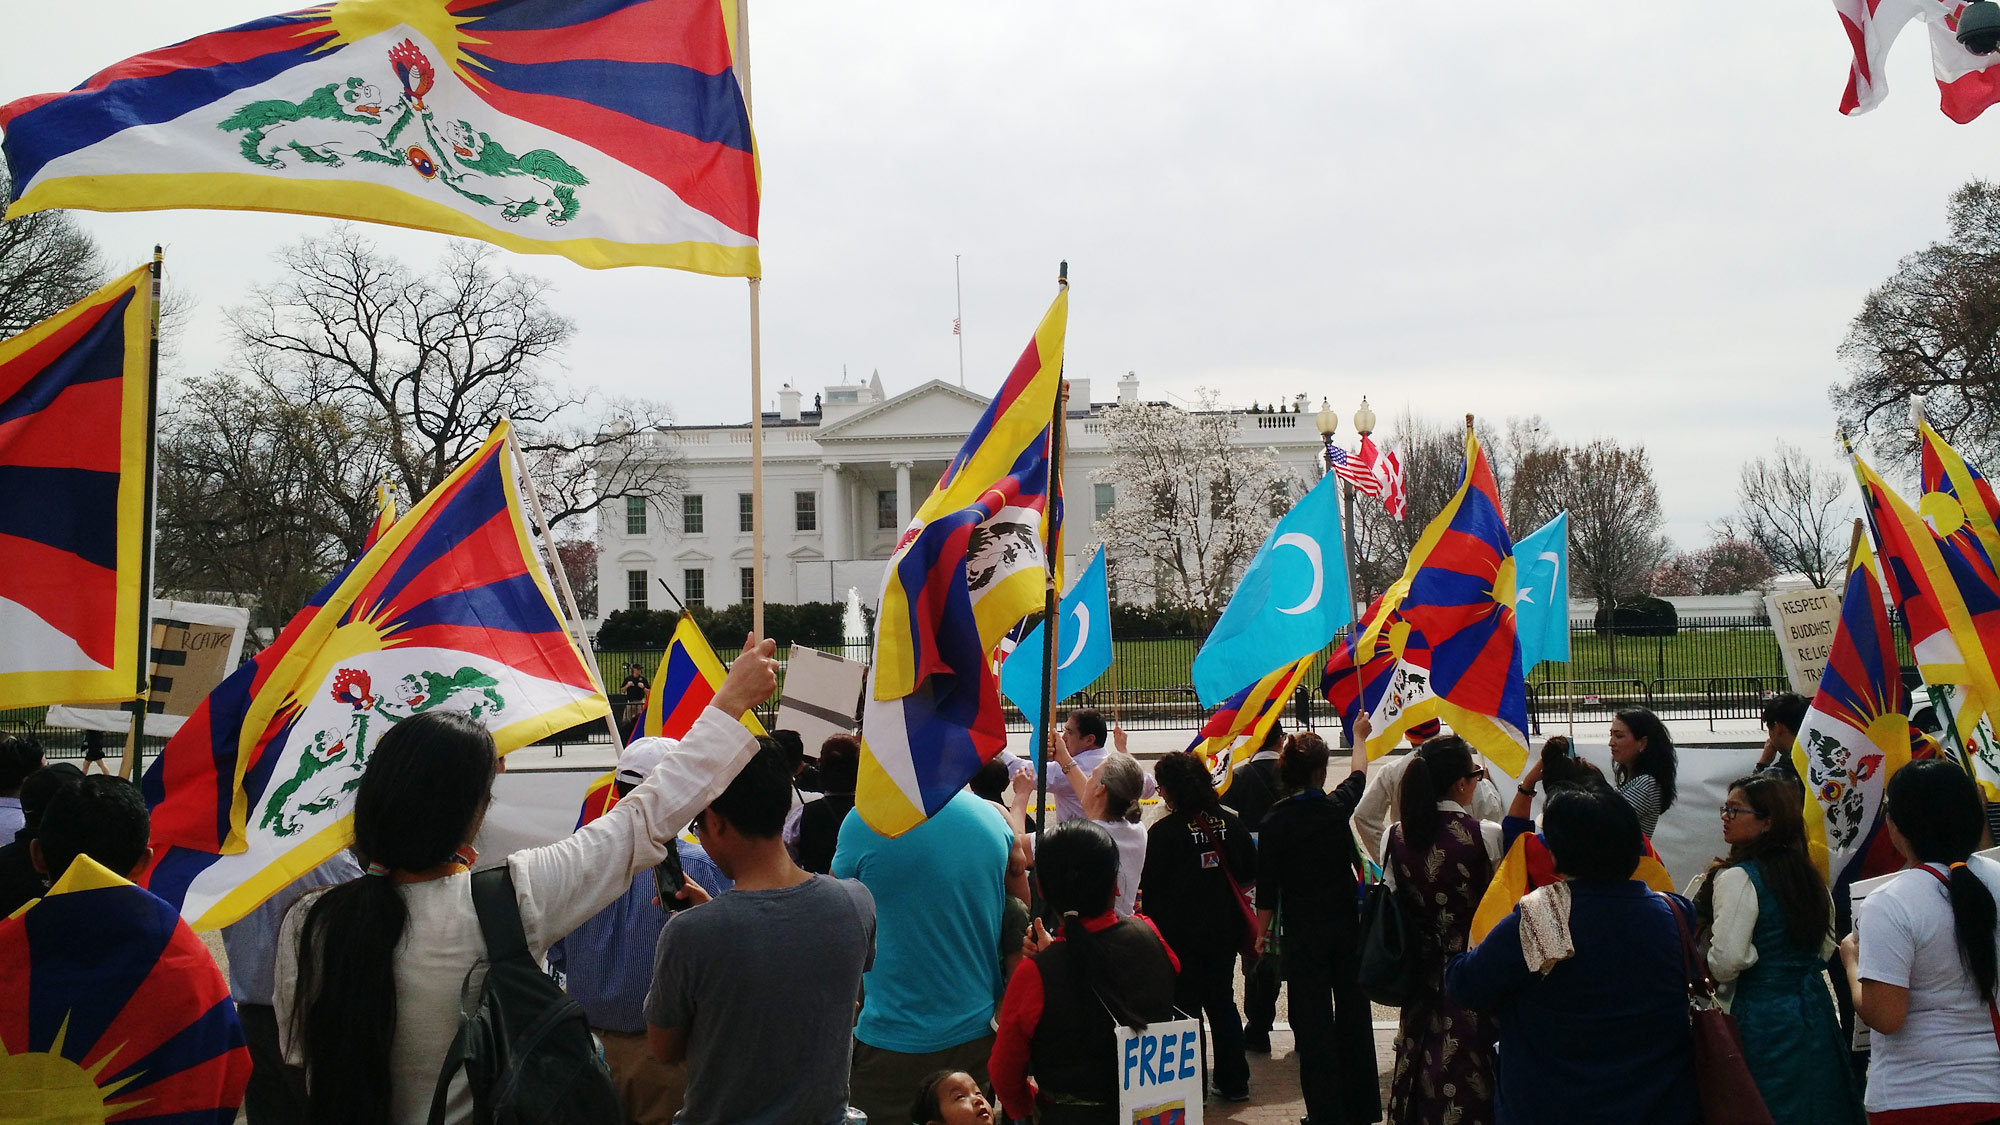 Tibetan, Uyghur, and Chinese demonstrators in front of the White House in Washington, DC.